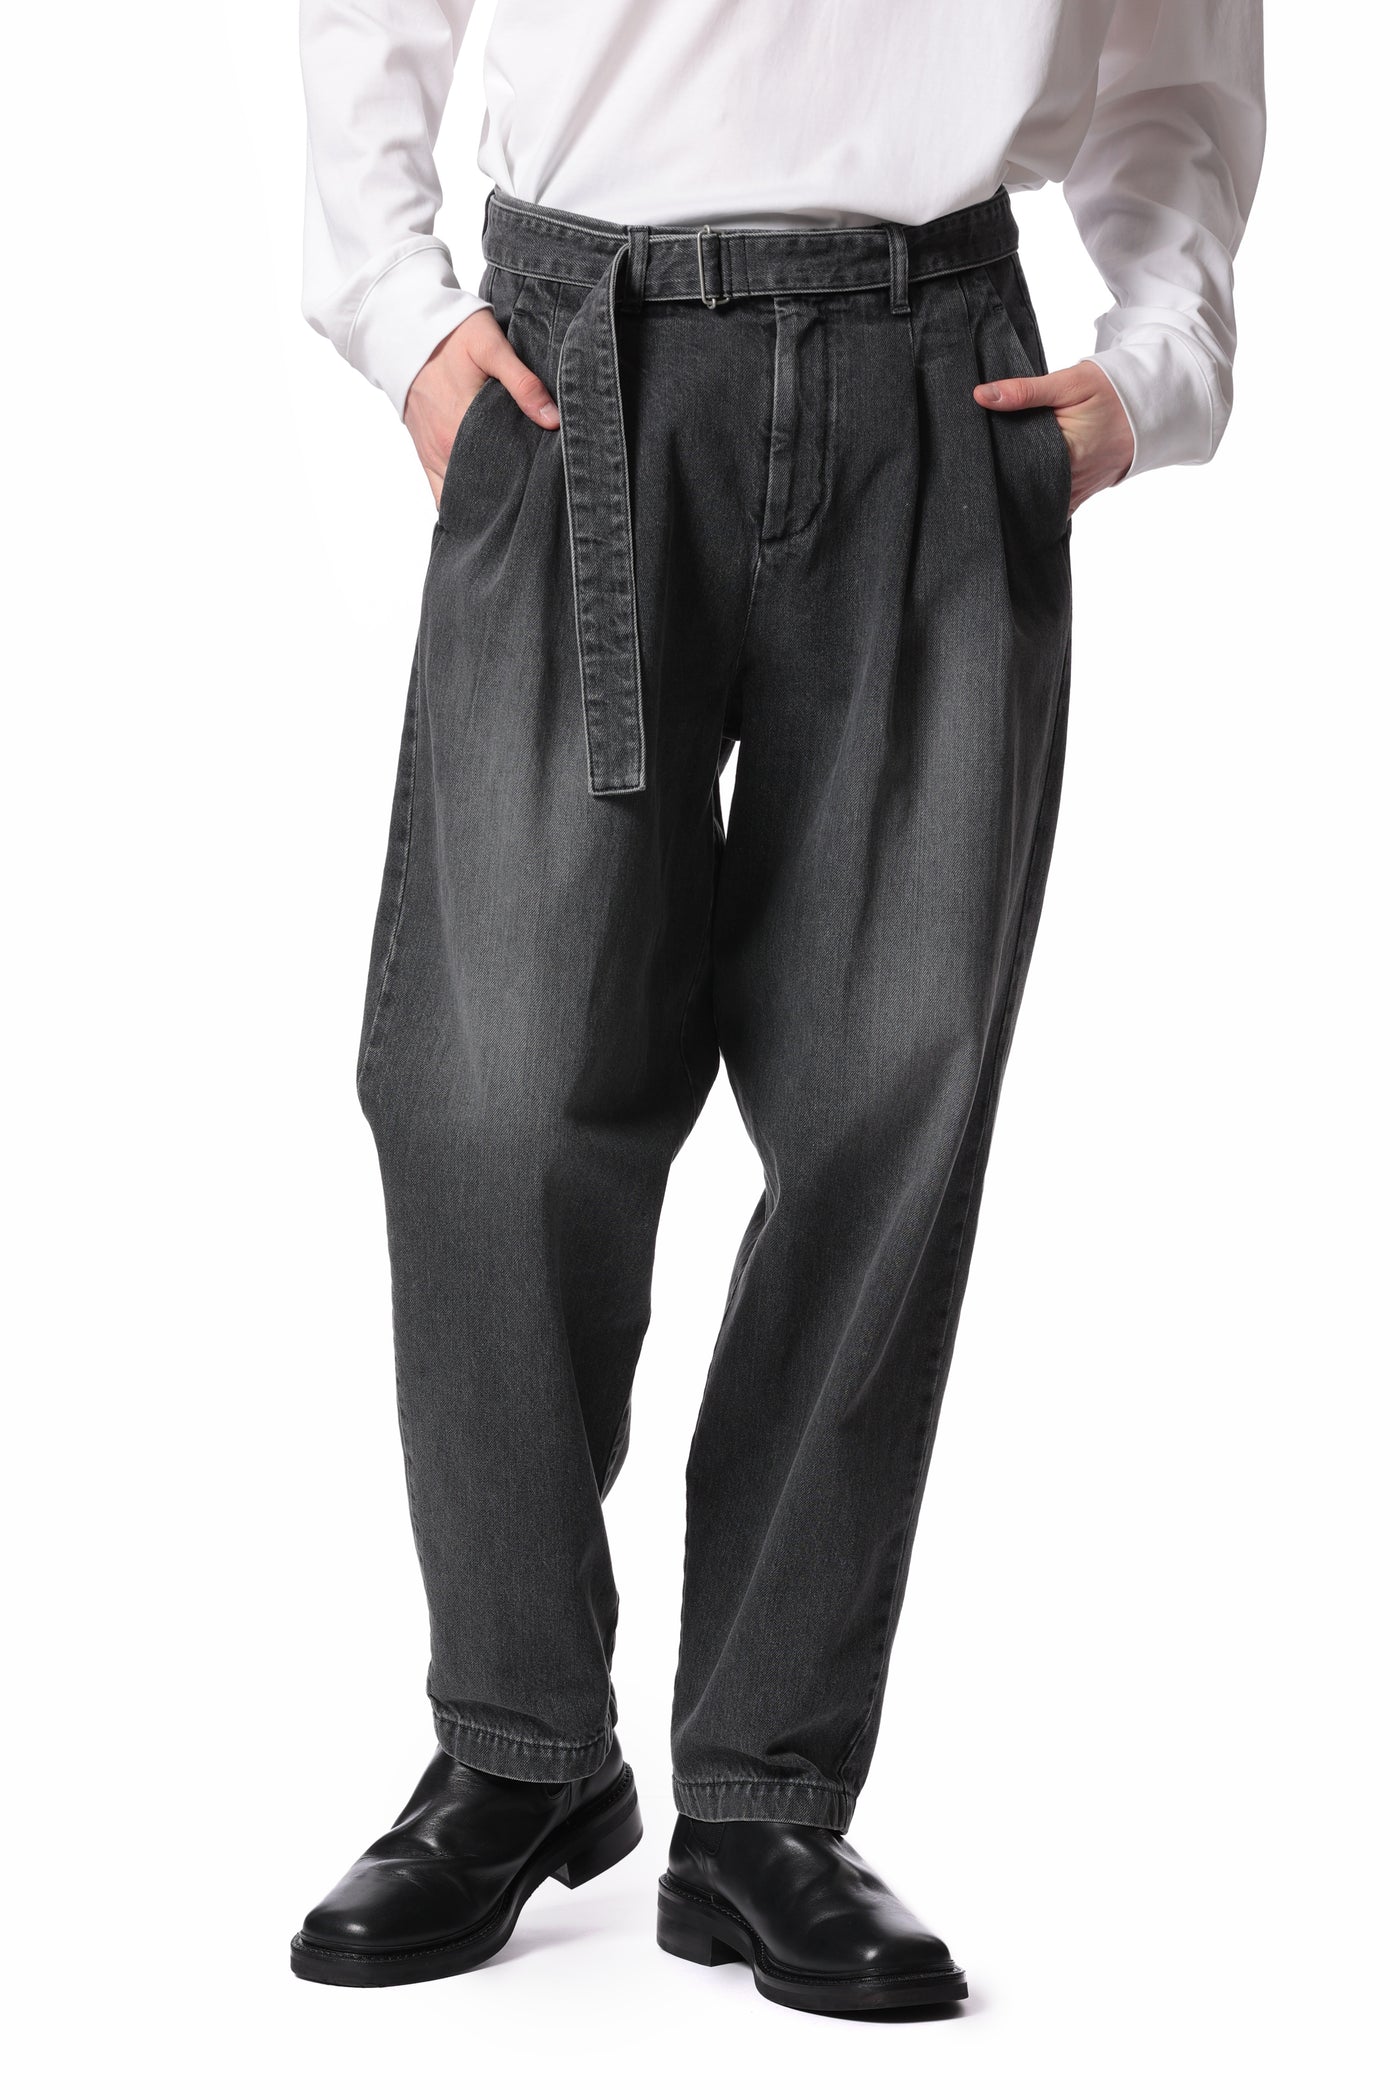 Released in February AP41-059 11oz denim 2-tuck wide tapered pants with belt